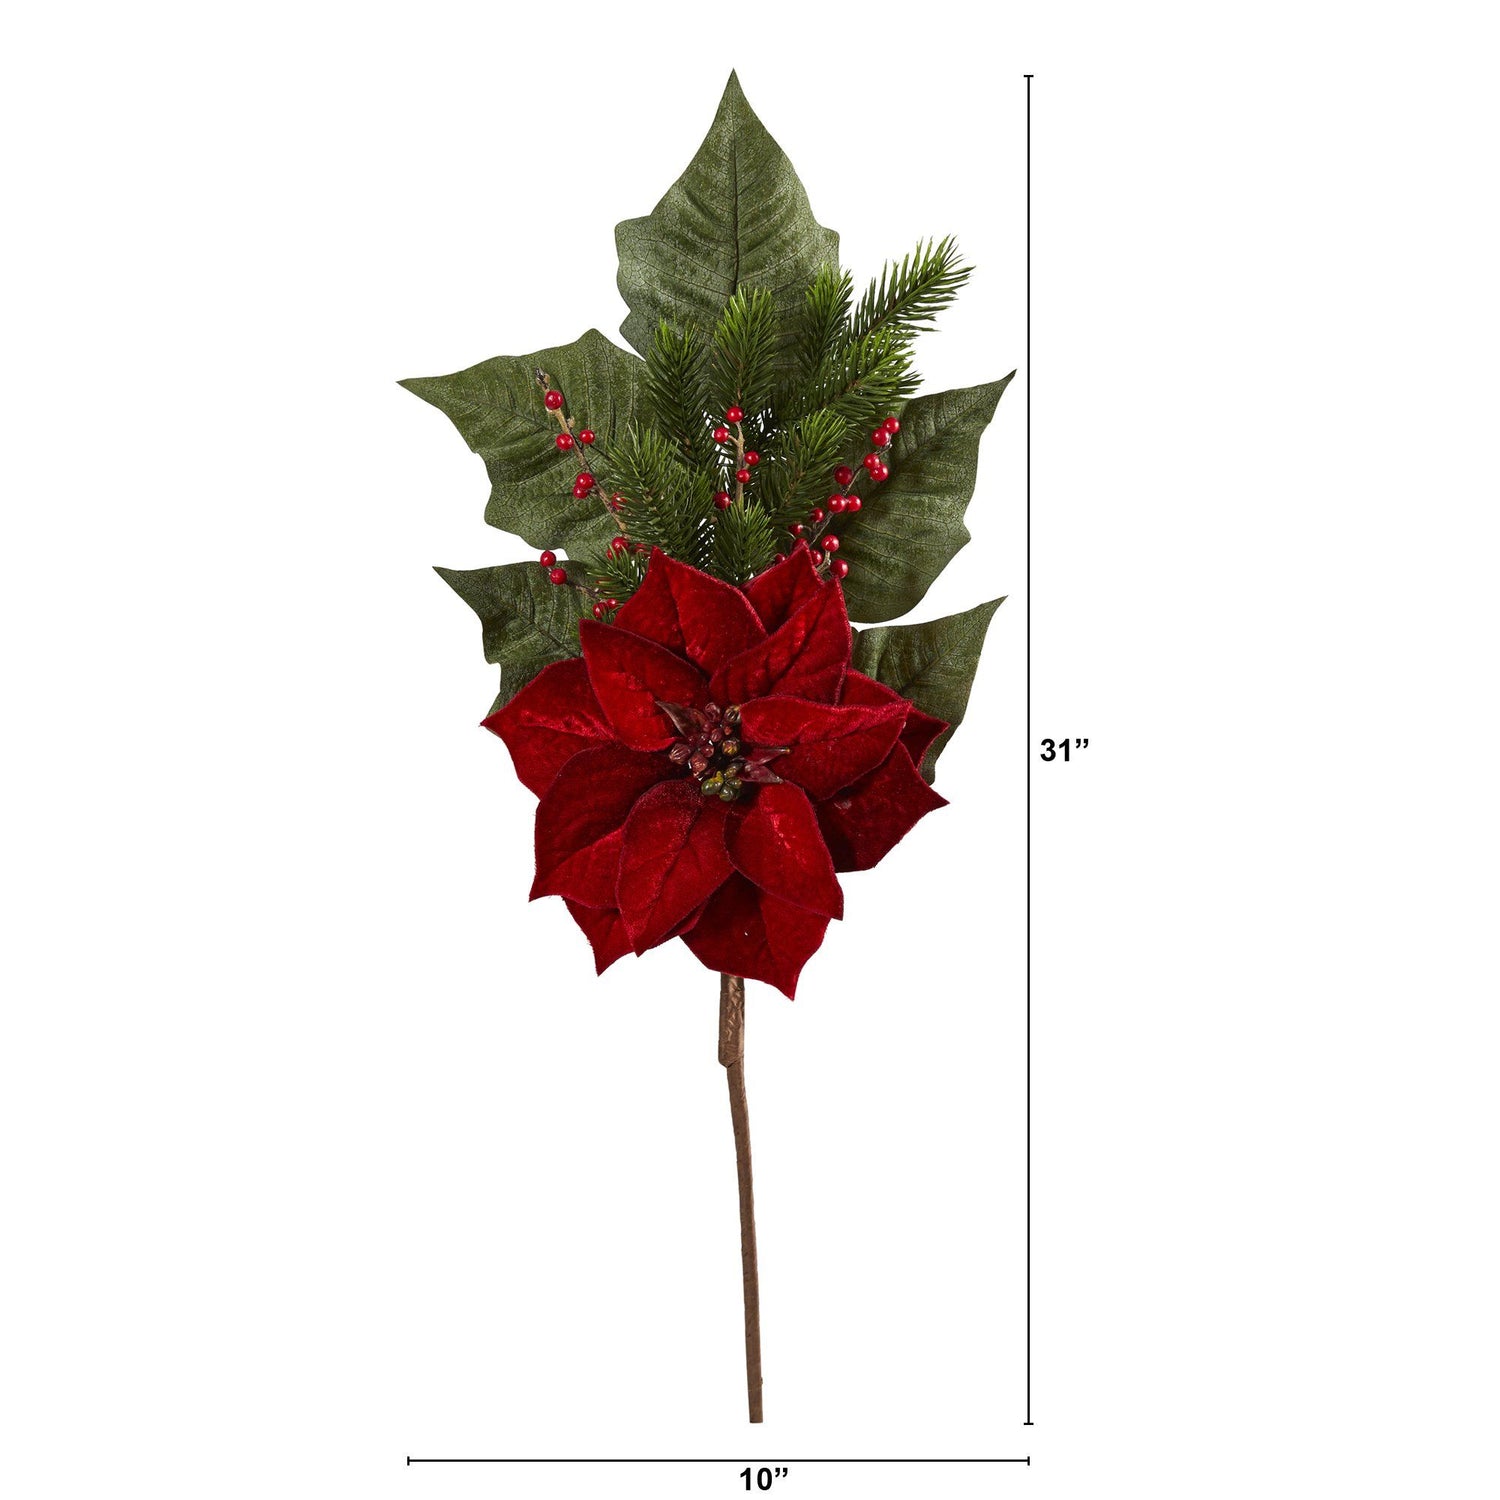 31” Poinsettia, Berries and Pine Artificial Flower Bundle (Set of 3)